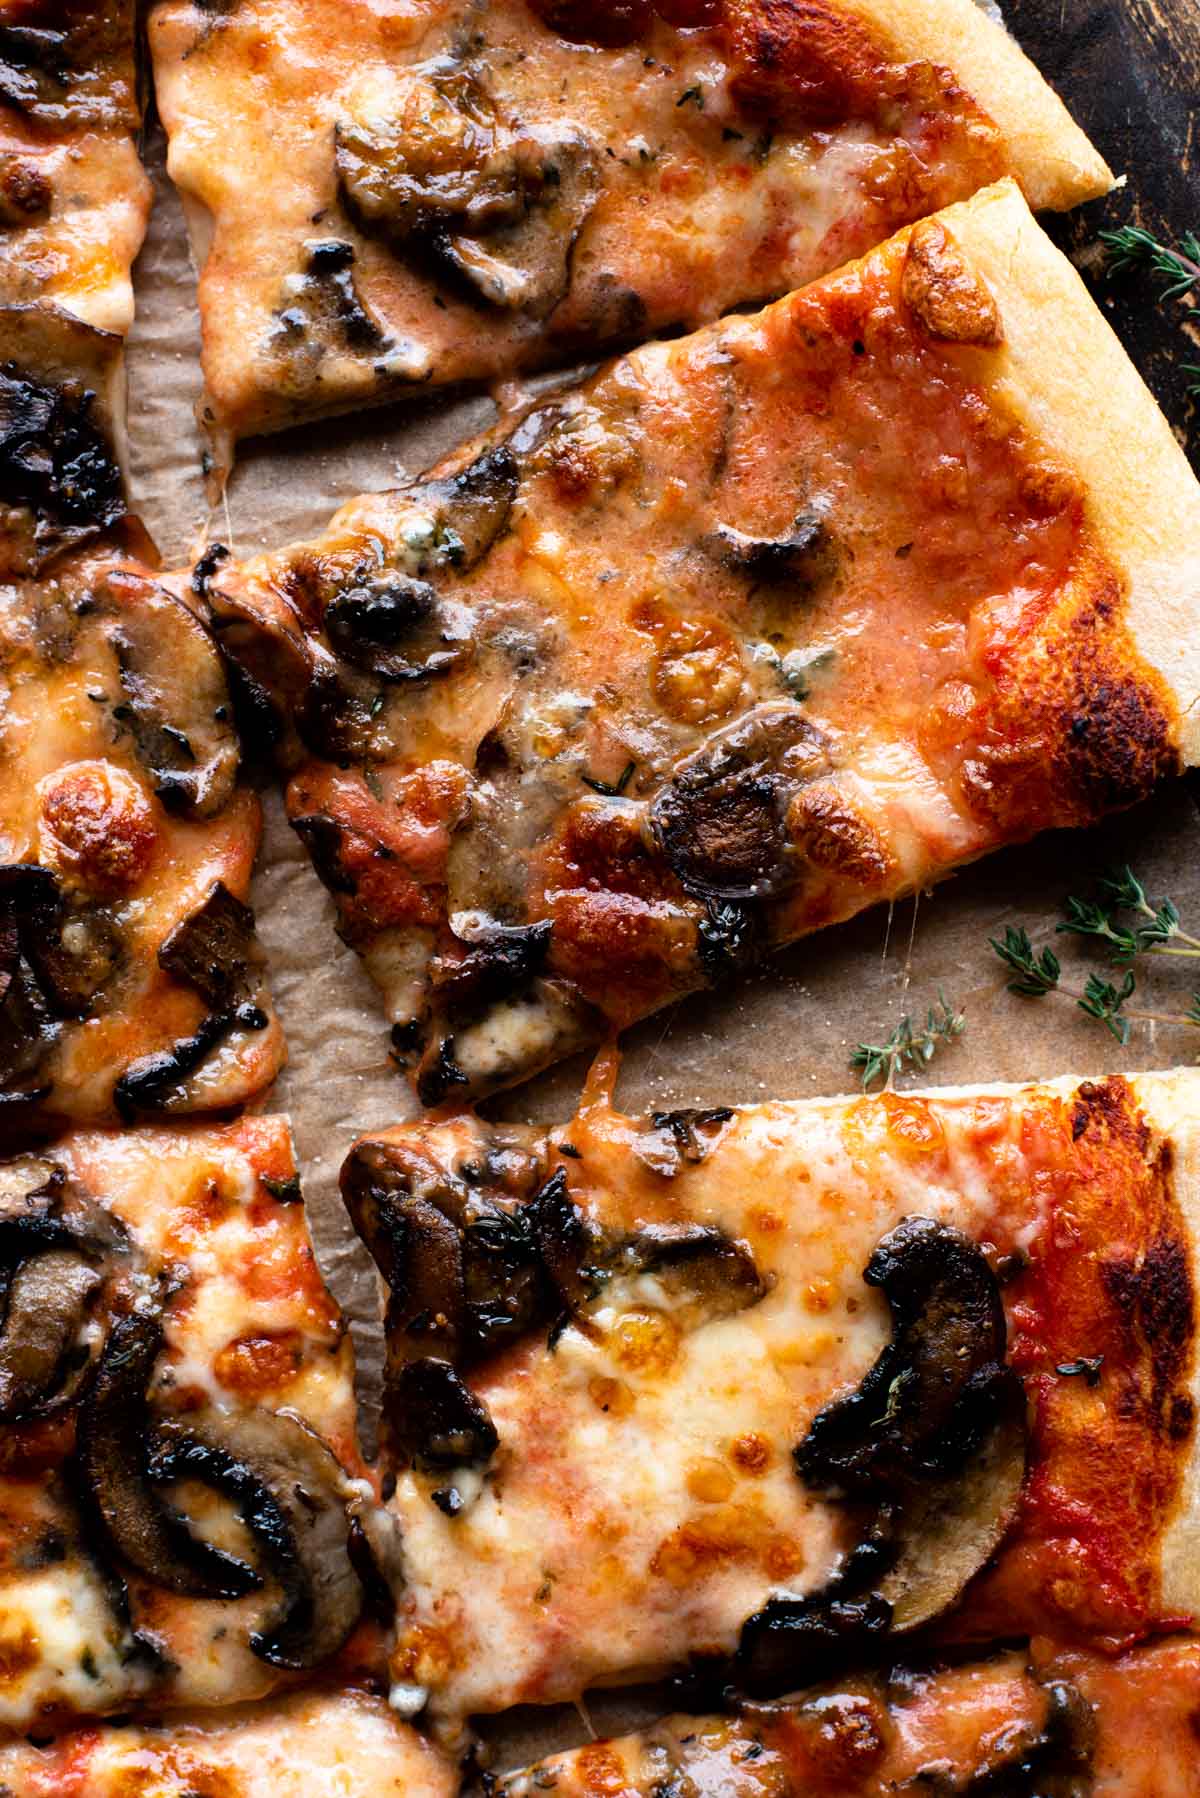 A close up of a mushroom pizza with taleggio cheese on a wooden surface.